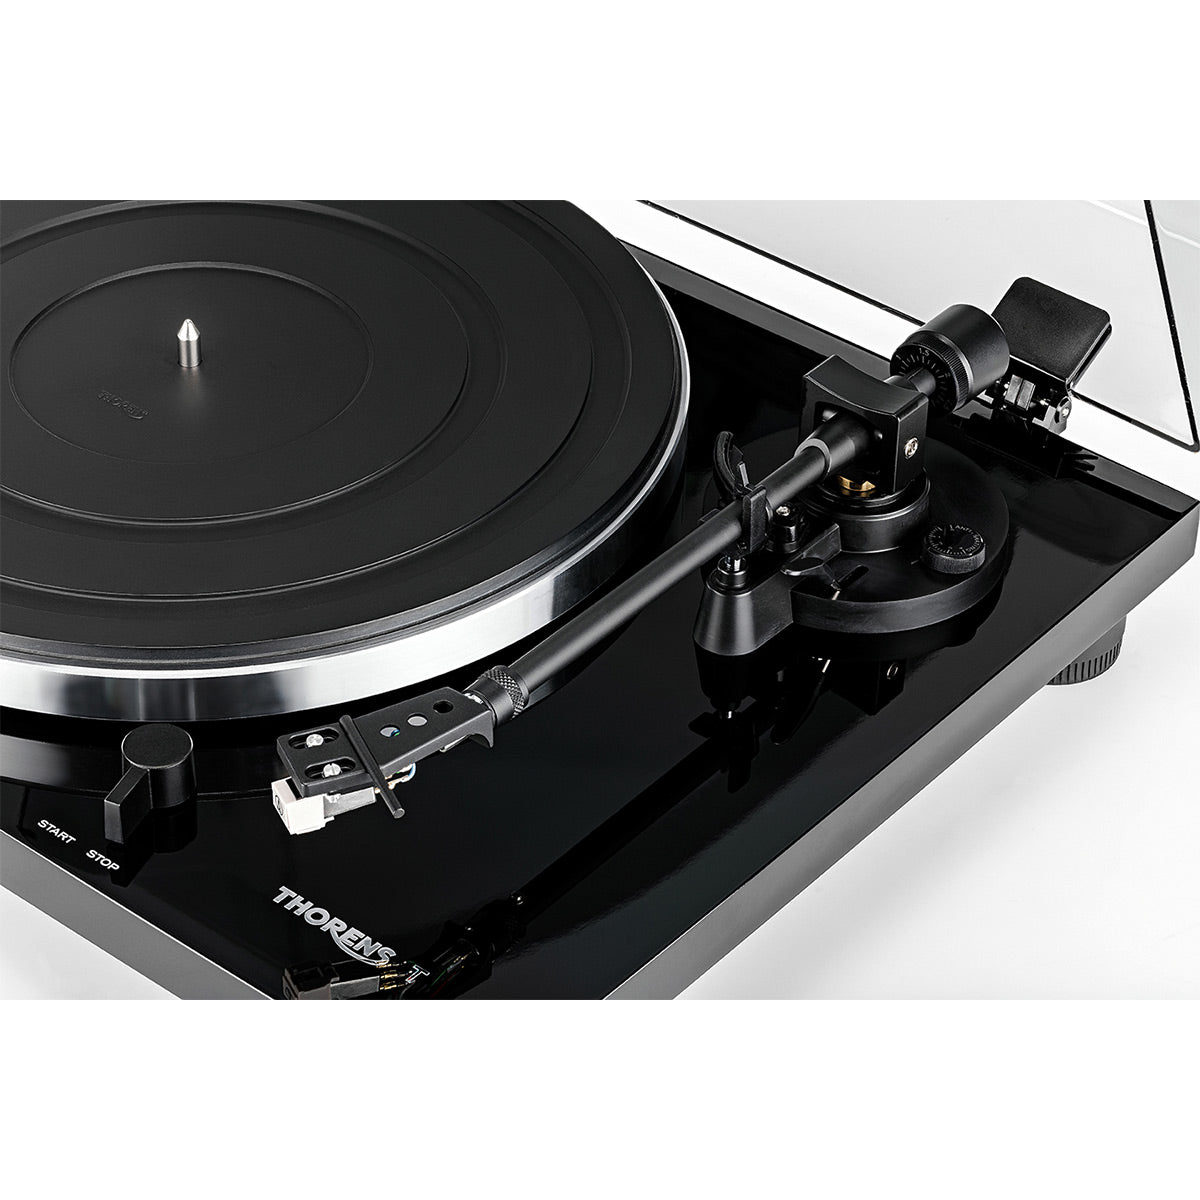 Thorens TD 201 Manual Two-Speed Turntable with Built-In Preamp (Black High Gloss)